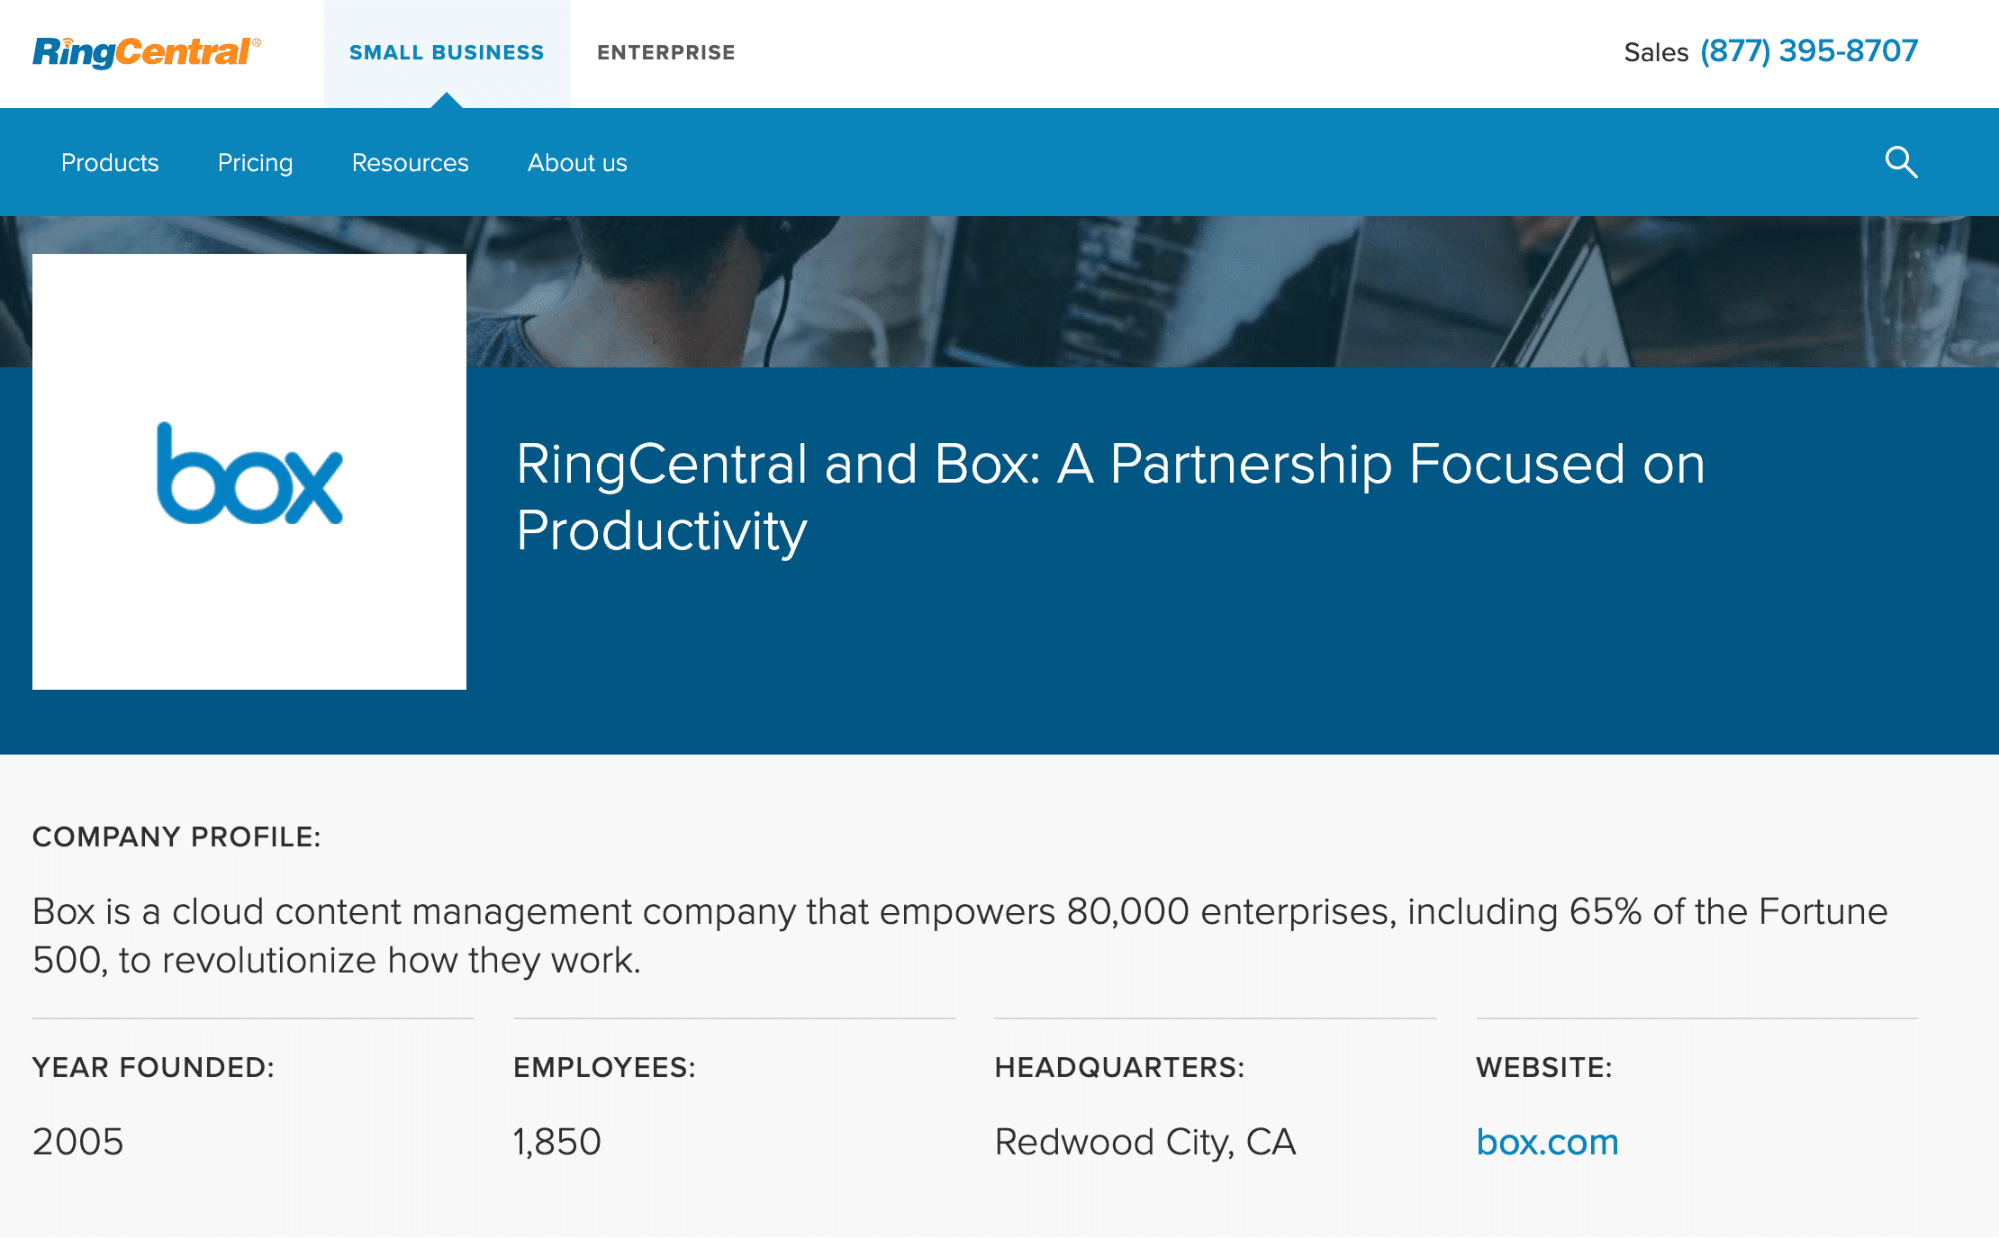 RingCentral case study about Box